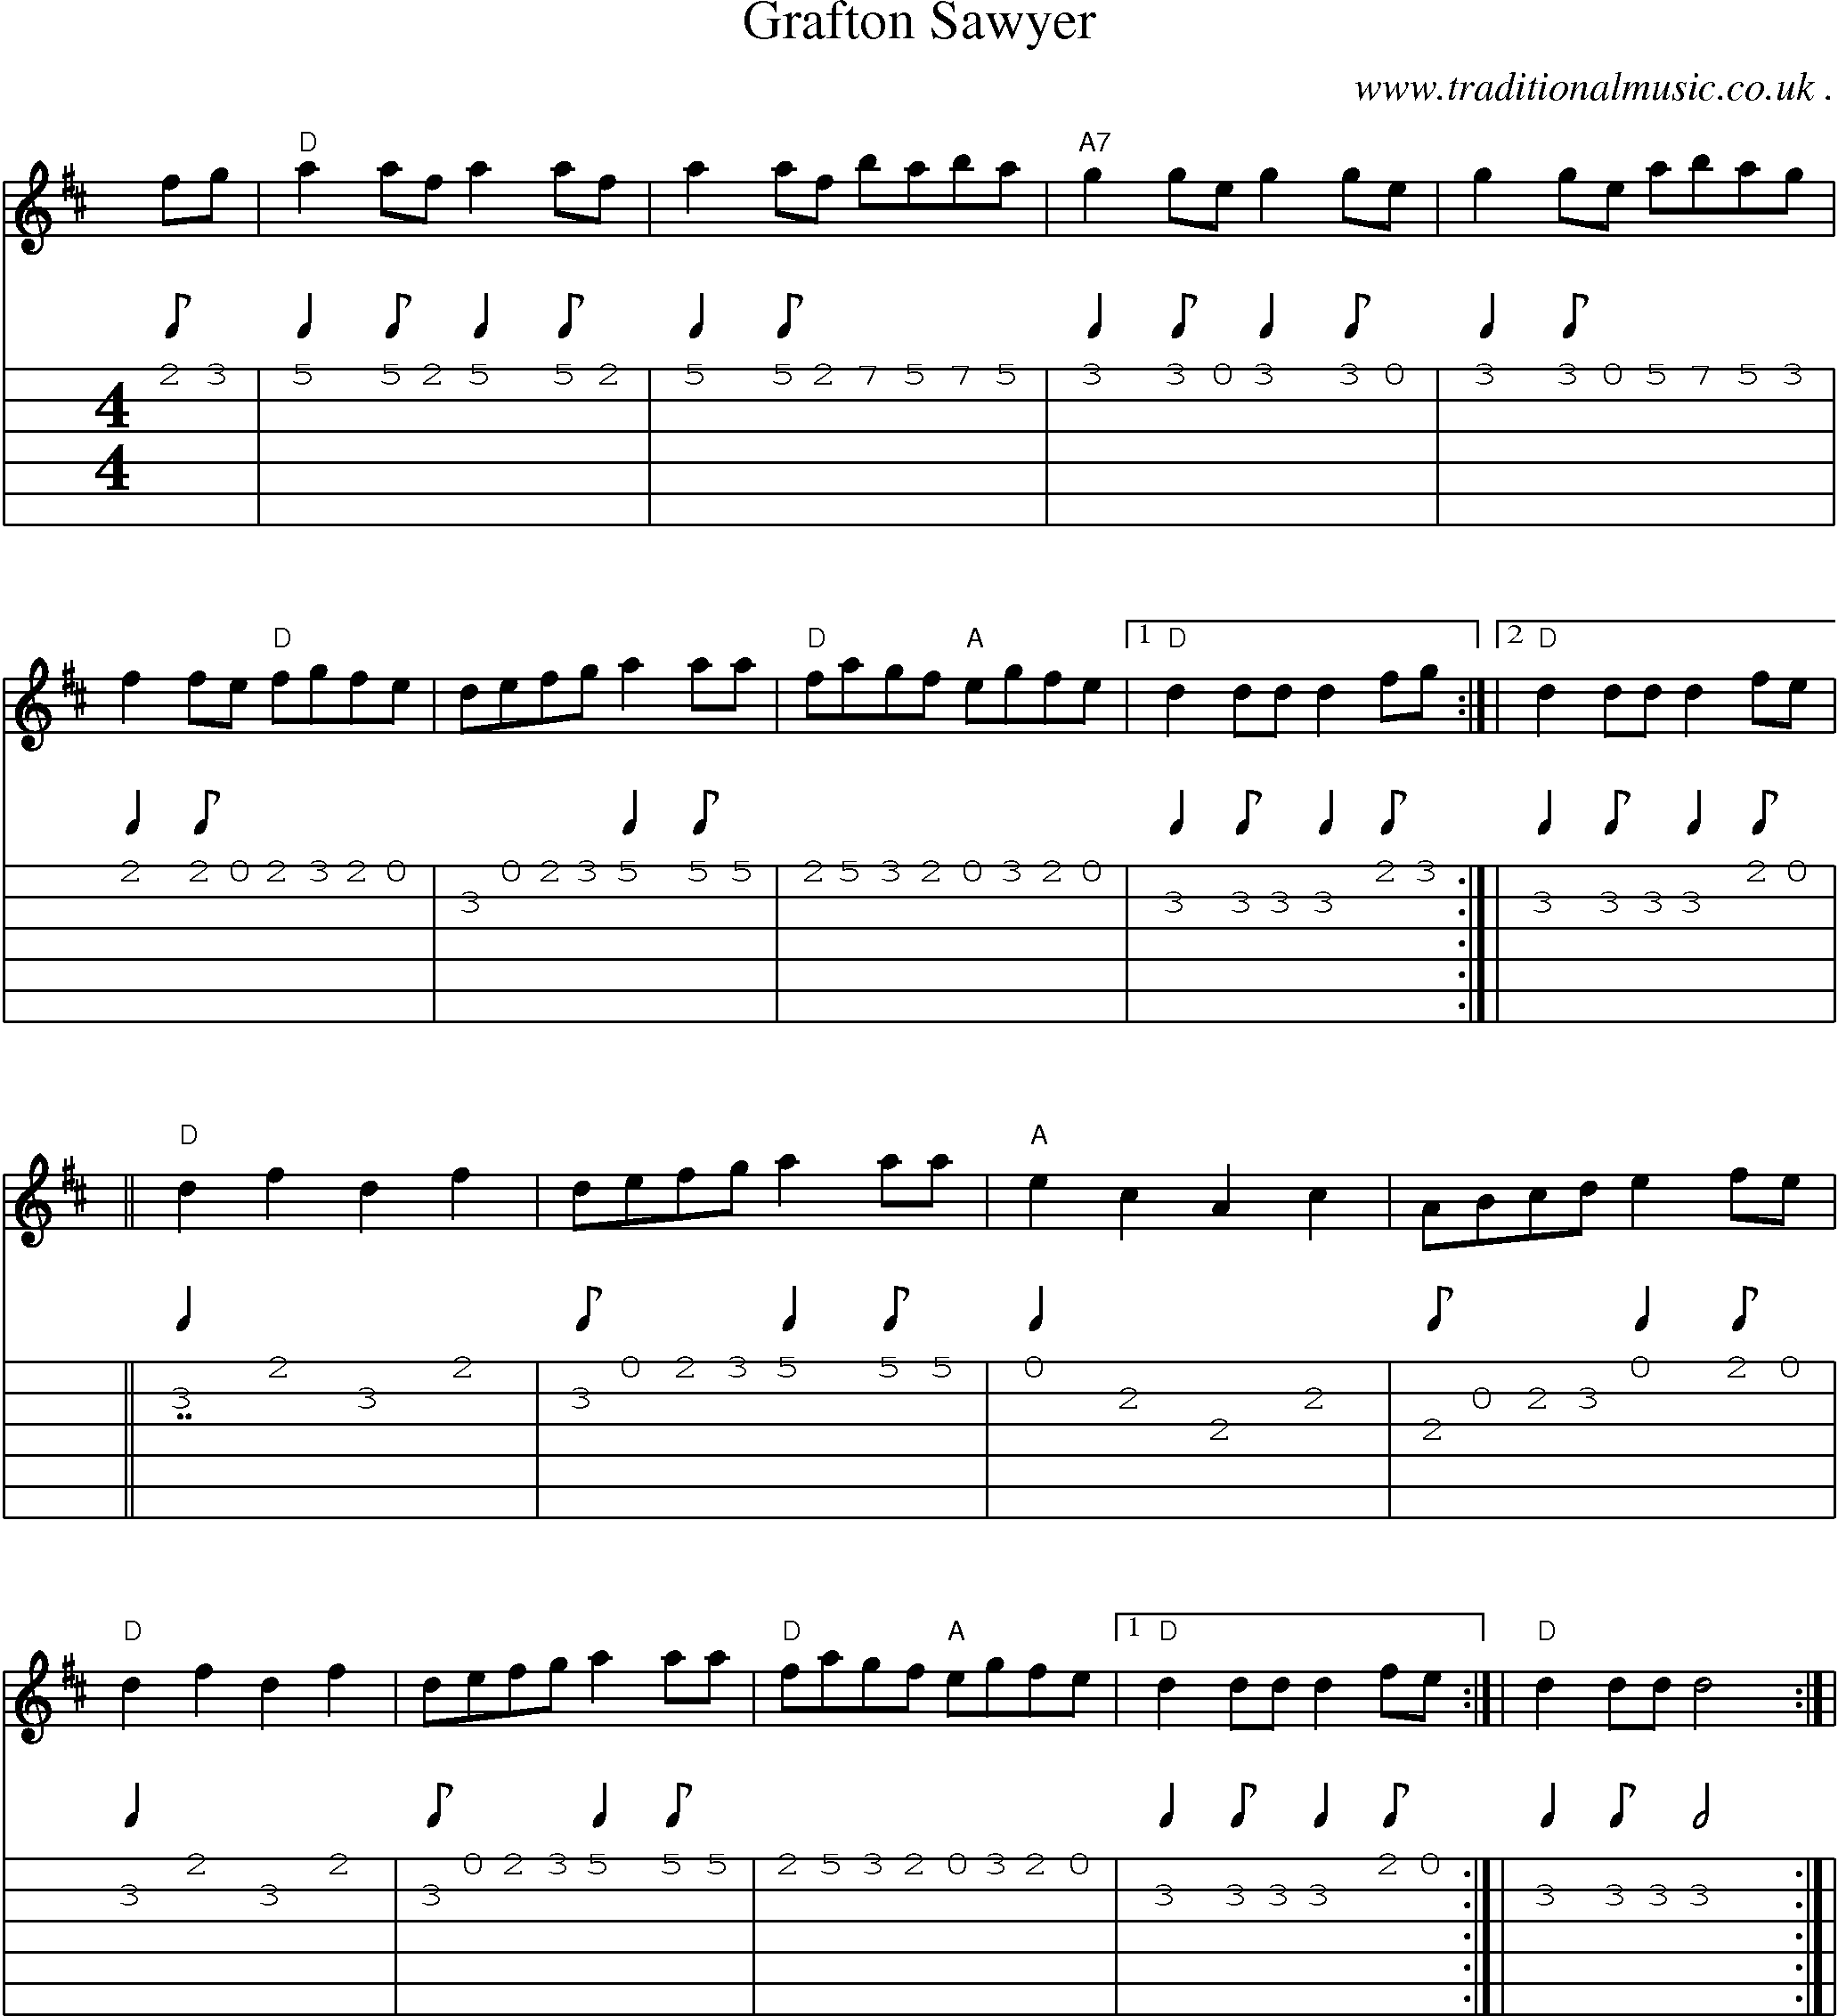 Sheet-music  score, Chords and Guitar Tabs for Grafton Sawyer